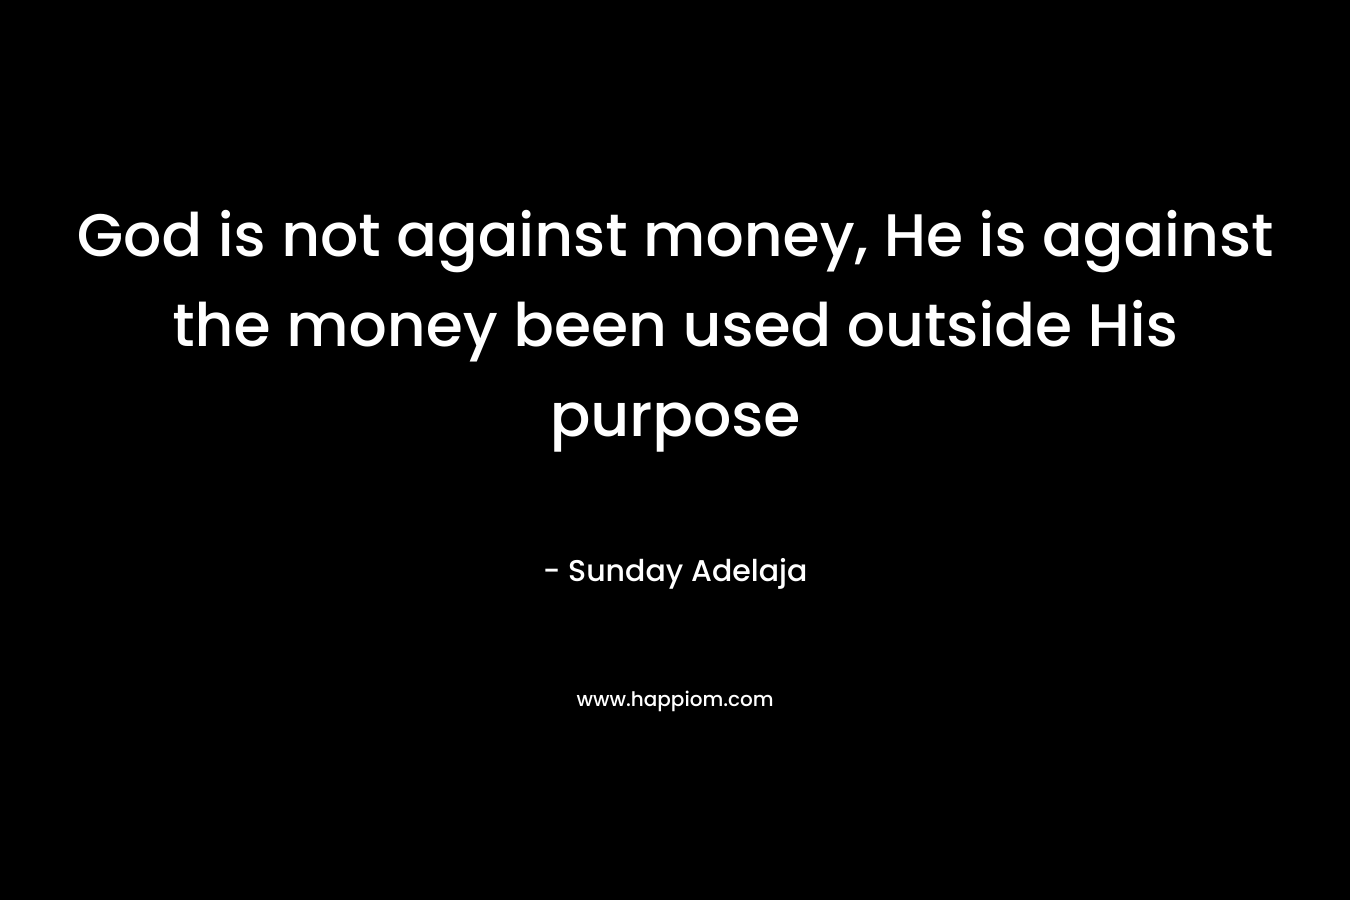 God is not against money, He is against the money been used outside His purpose